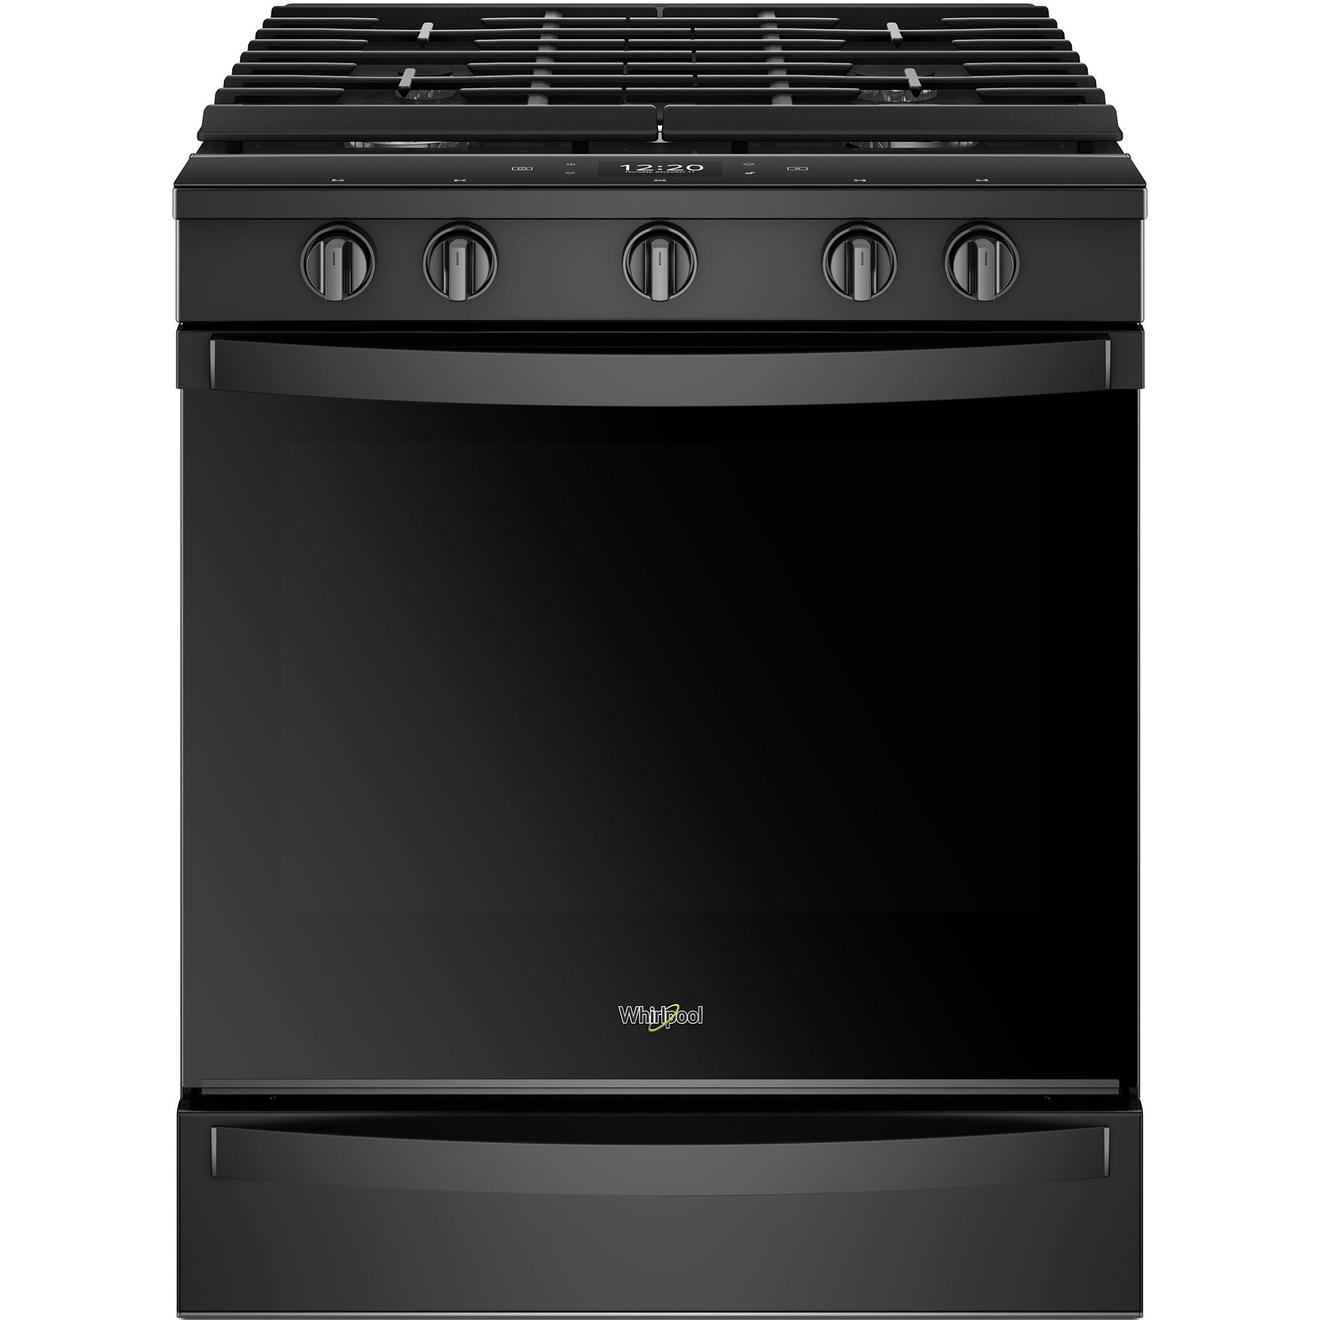 Whirlpool 30 inch Single Oven Gas Range offers at $1999.98 in Trail Appliances